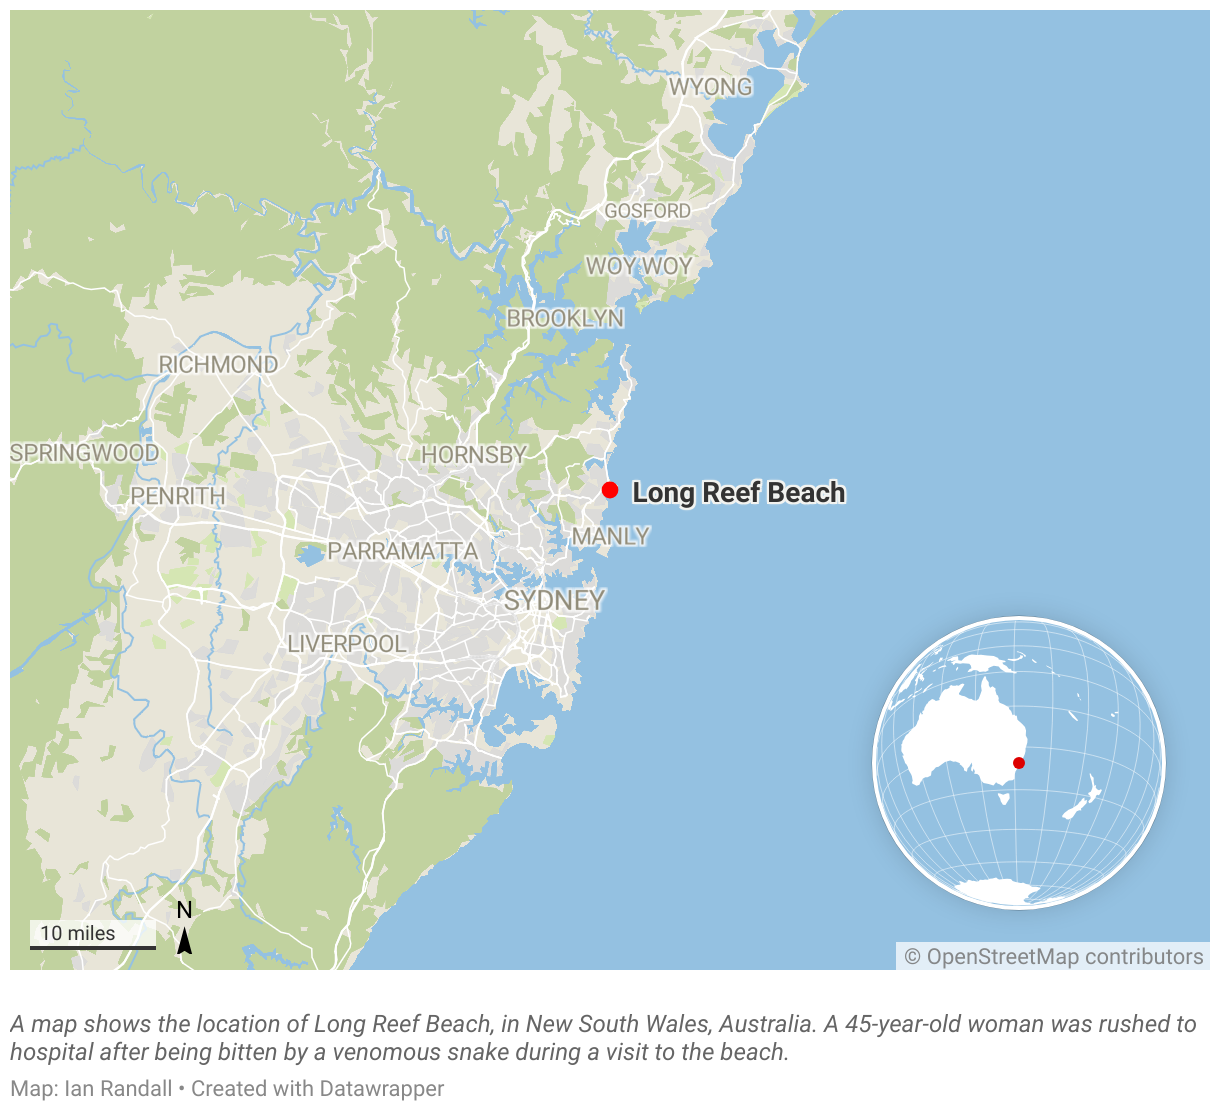 A map shows the location of Long Reef Beach, in New South Wales, Australia.